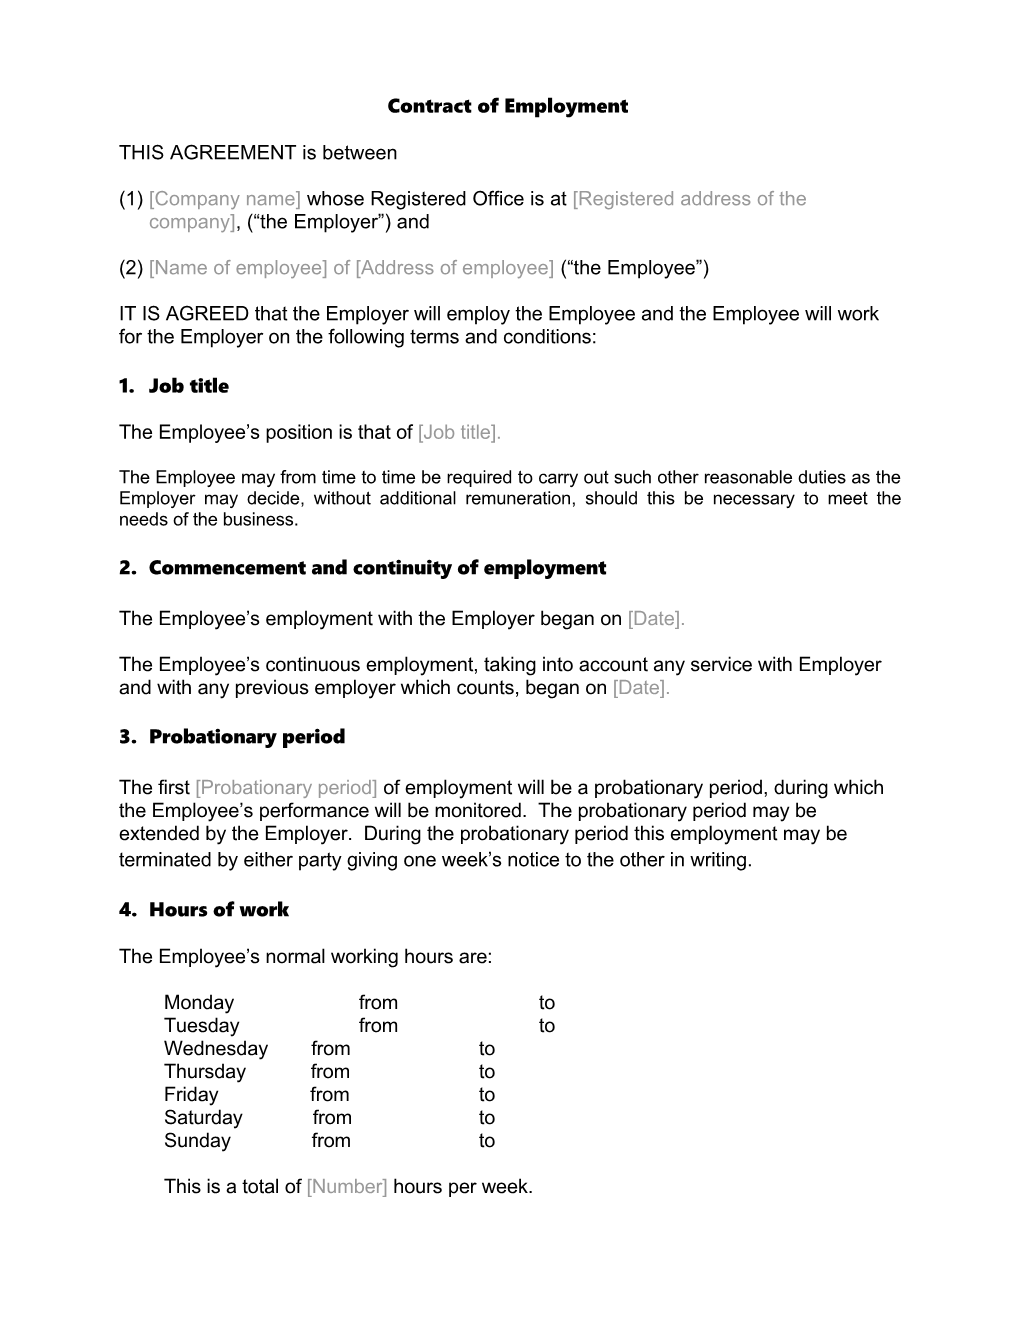 Contract of Employment (Draft)